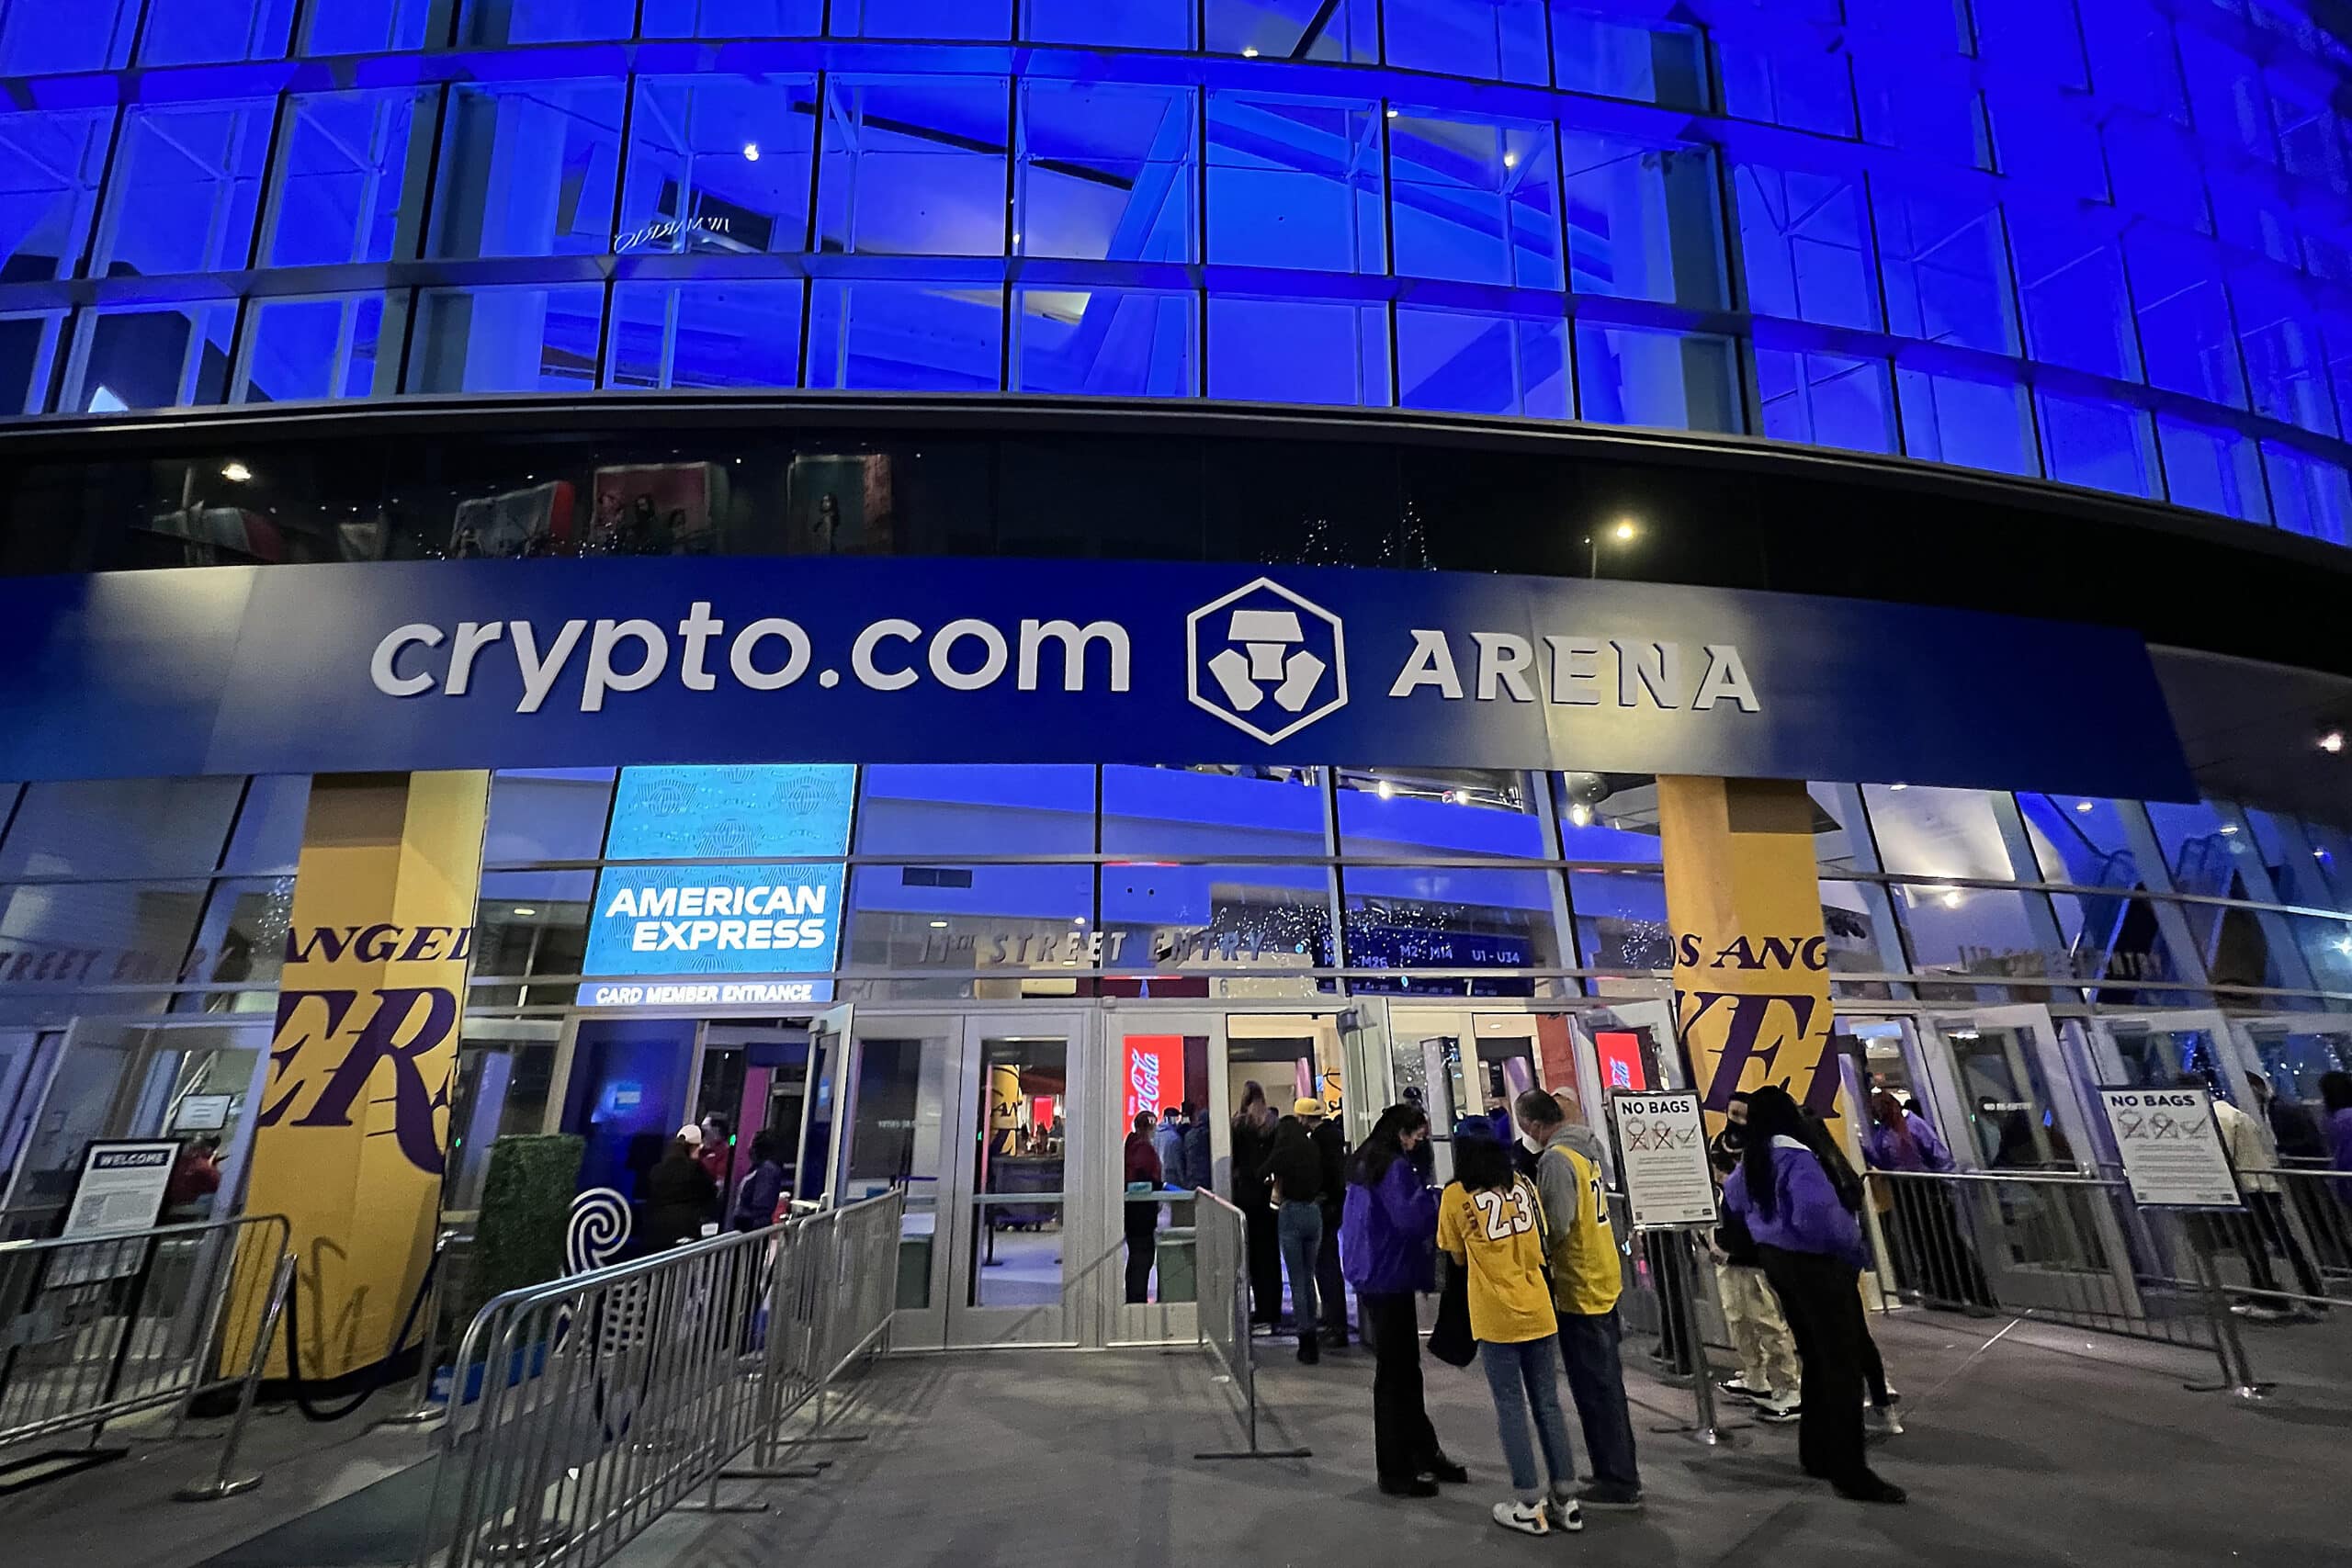 Lakers, Kings Playoff Runs Prove Lucrative for Crypto.com Arena